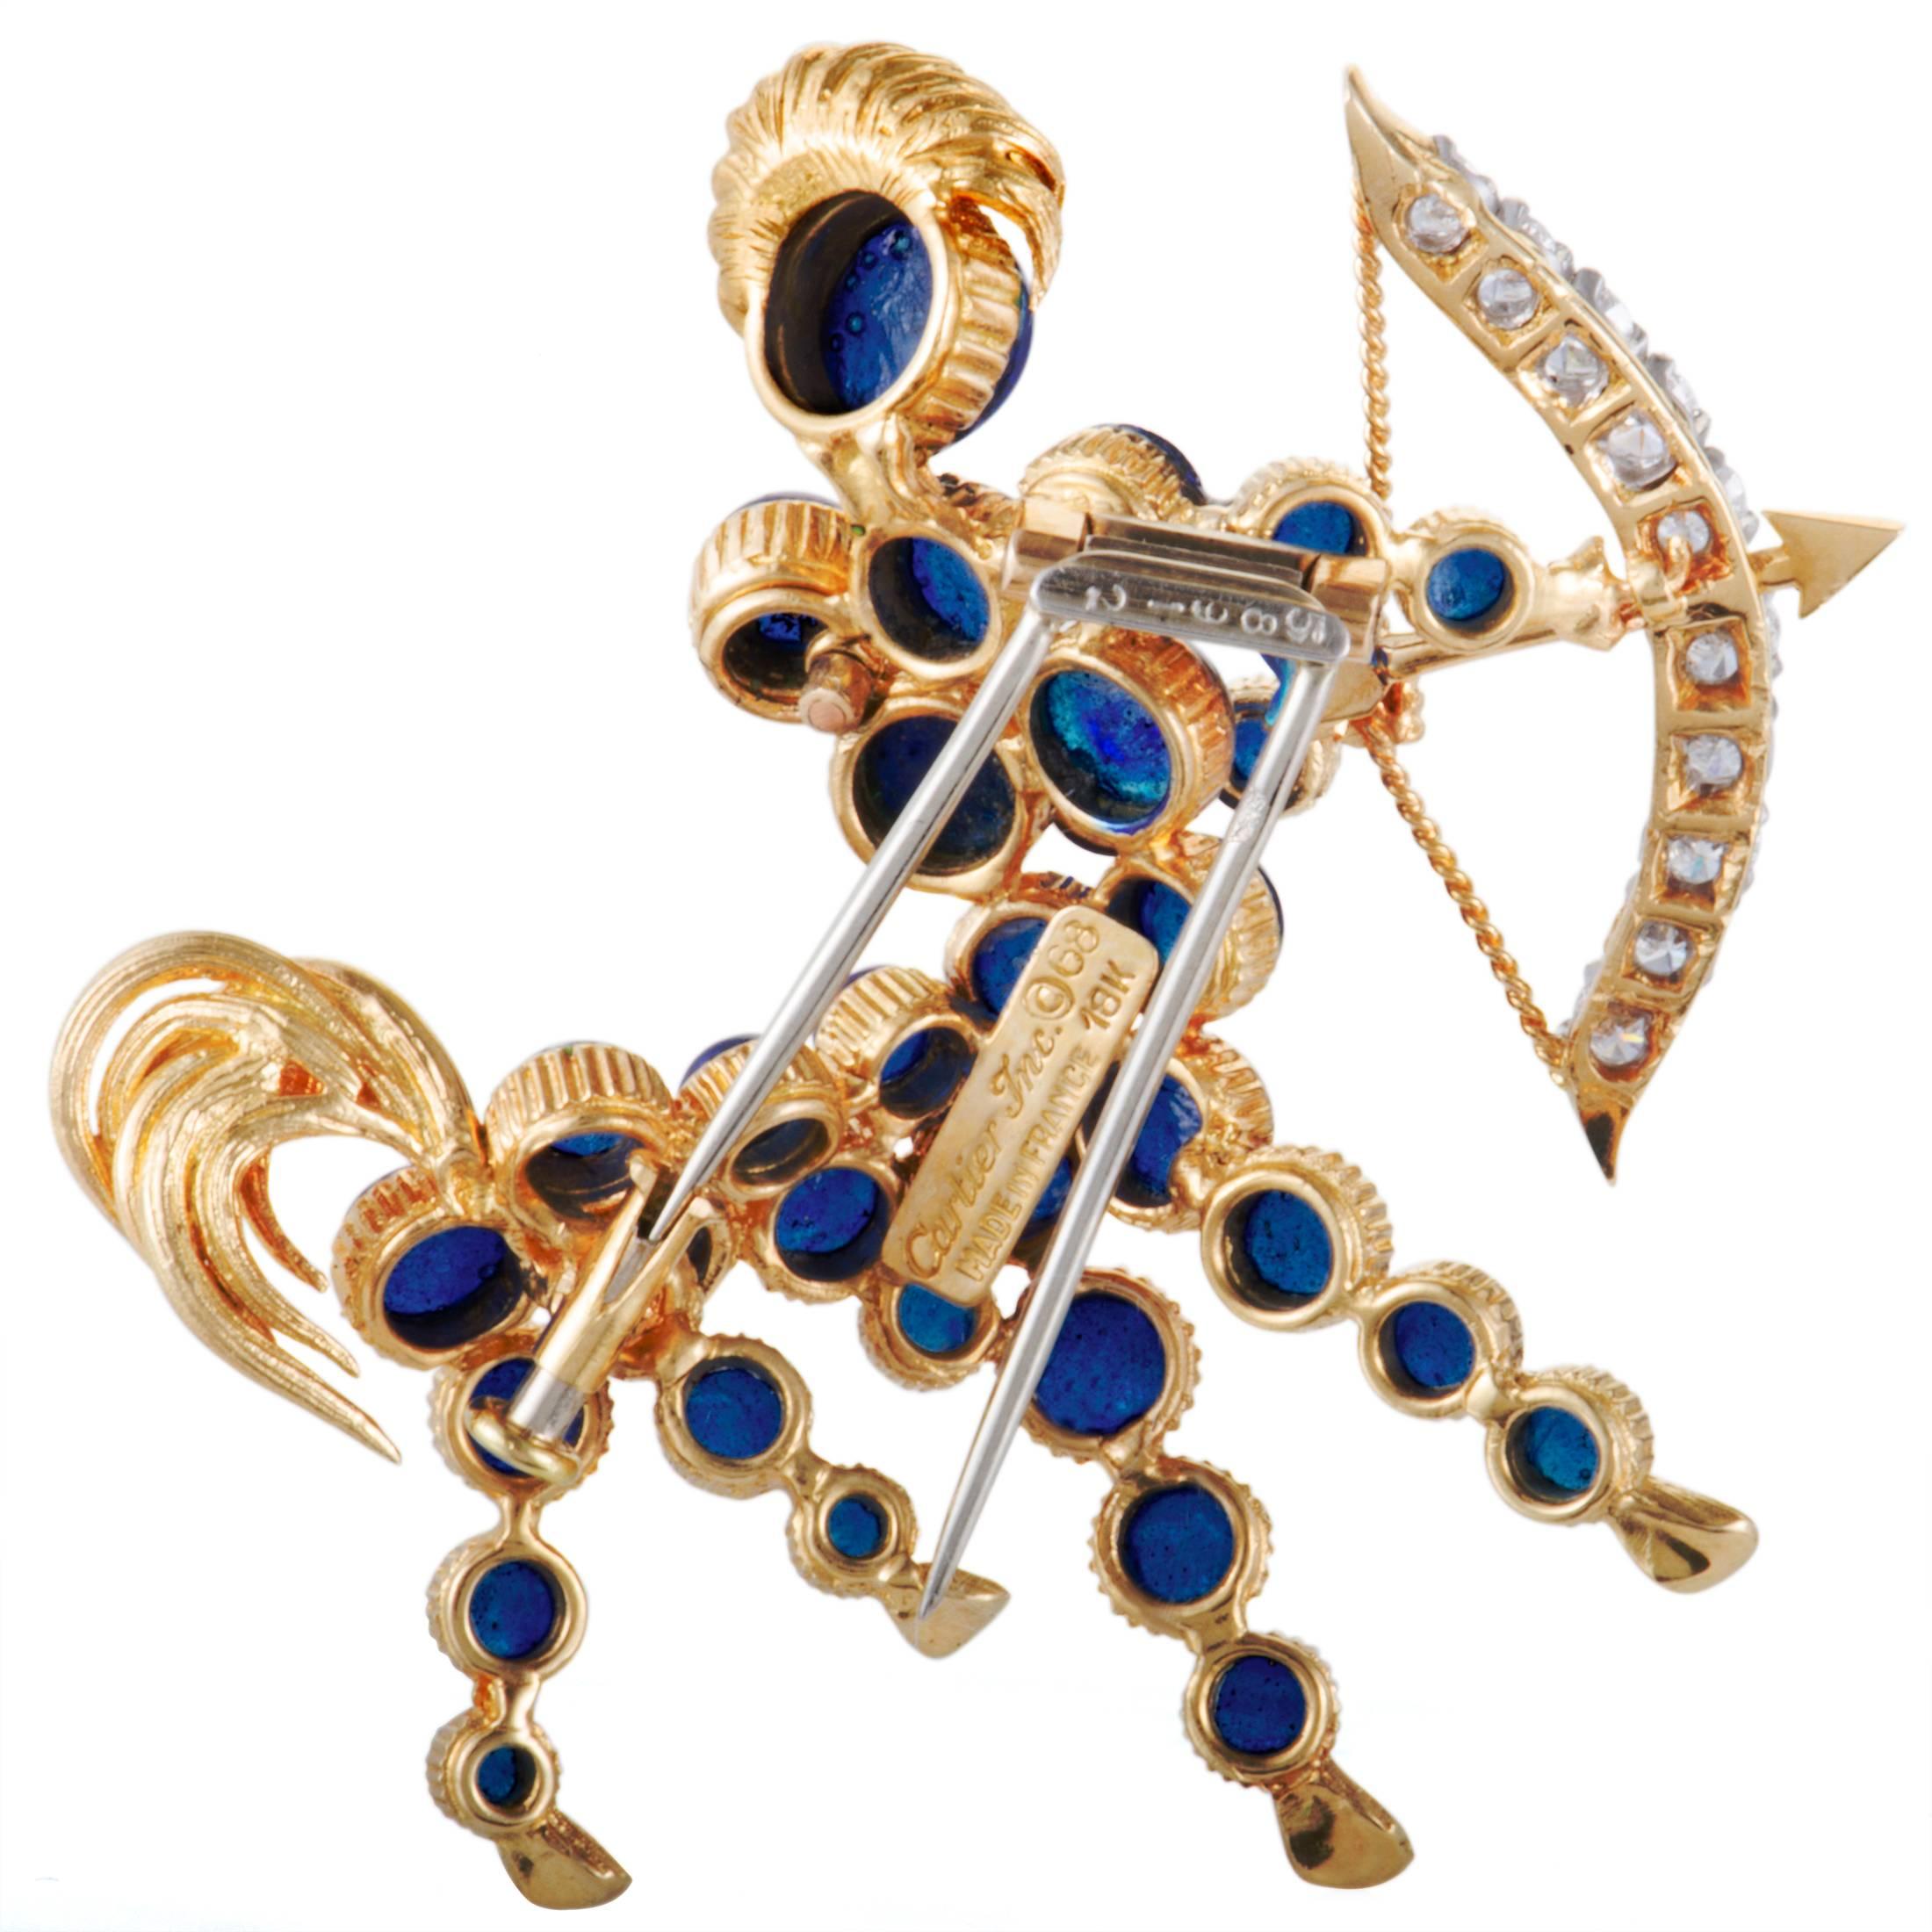 Drawing inspiration from the irresistibly mystical world of astrology, this fabulous brooch from Cartier depicts the zodiac sign of Sagittarius. The brooch is expertly made of luxurious 18K yellow gold and it is decorated with blue stones and 0.45